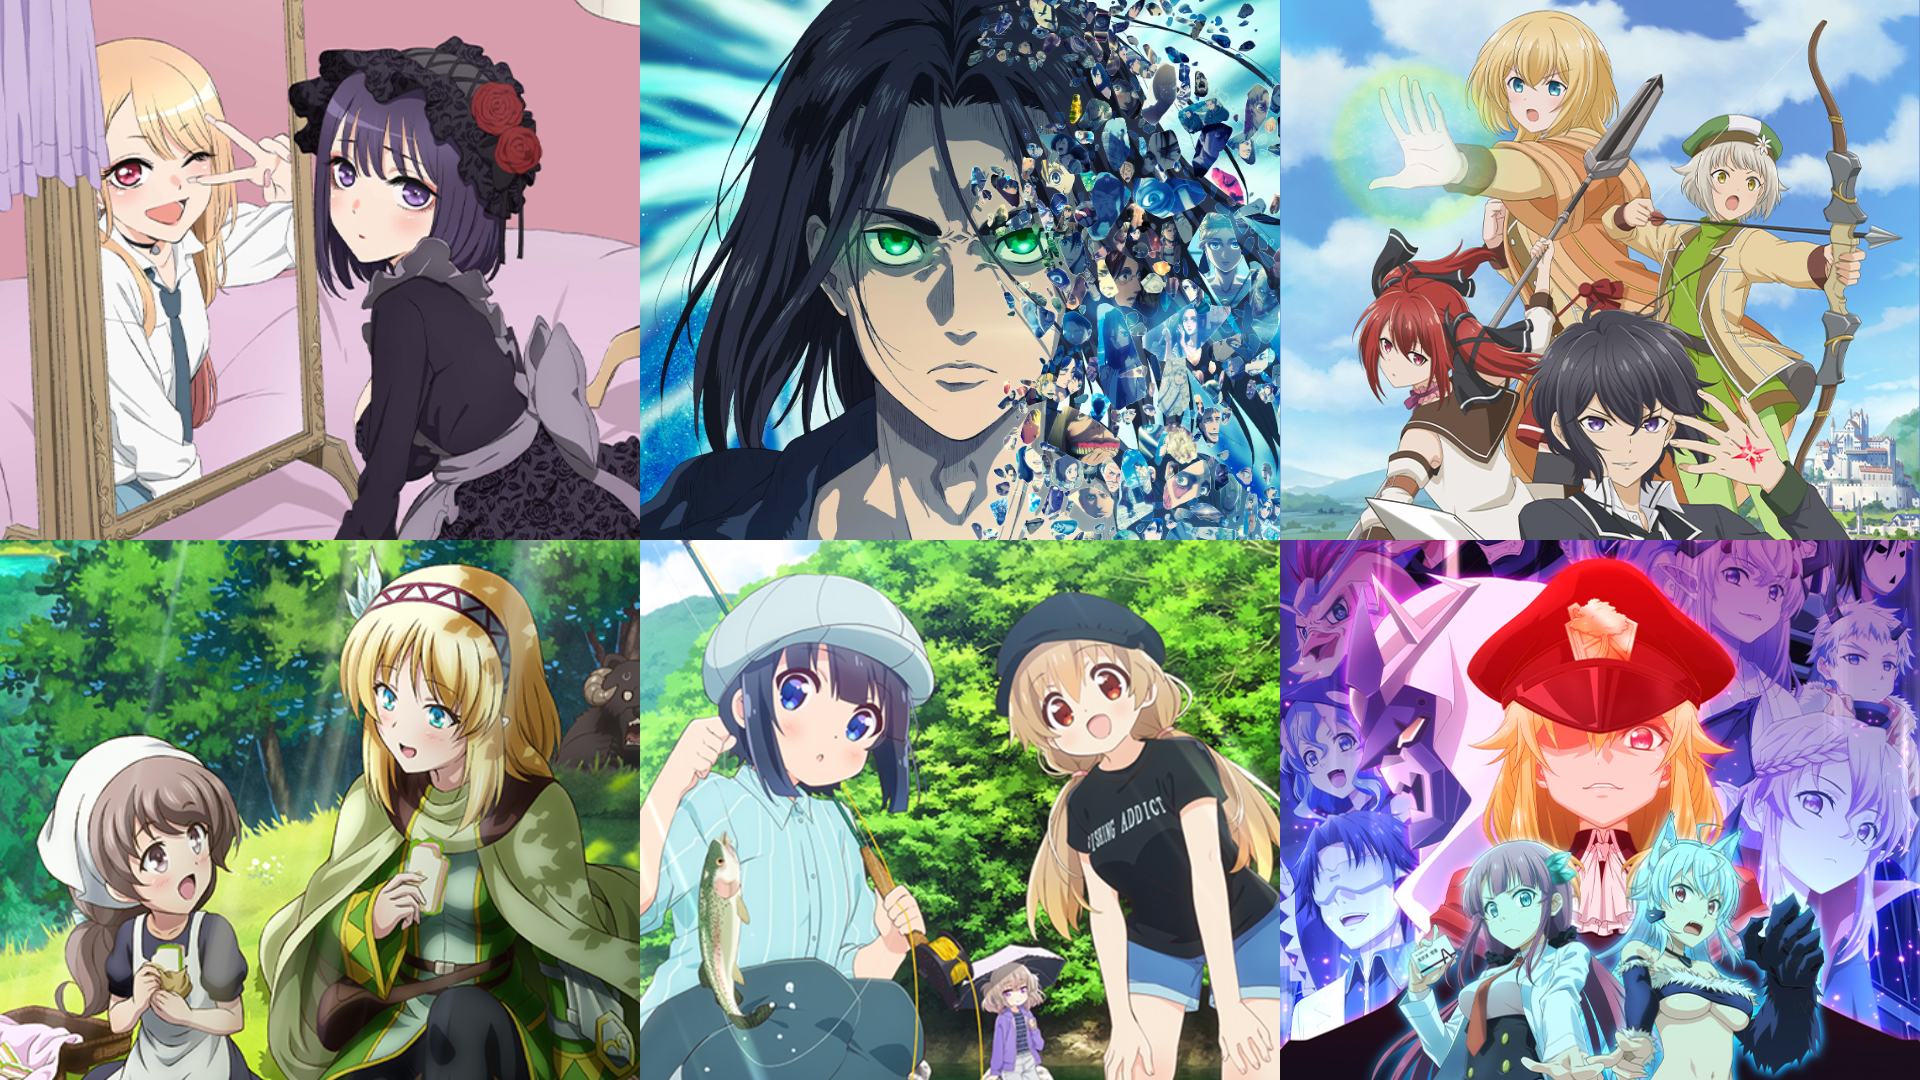 Where to Watch Winter 2022 Anime If You Are in Southeast Asia